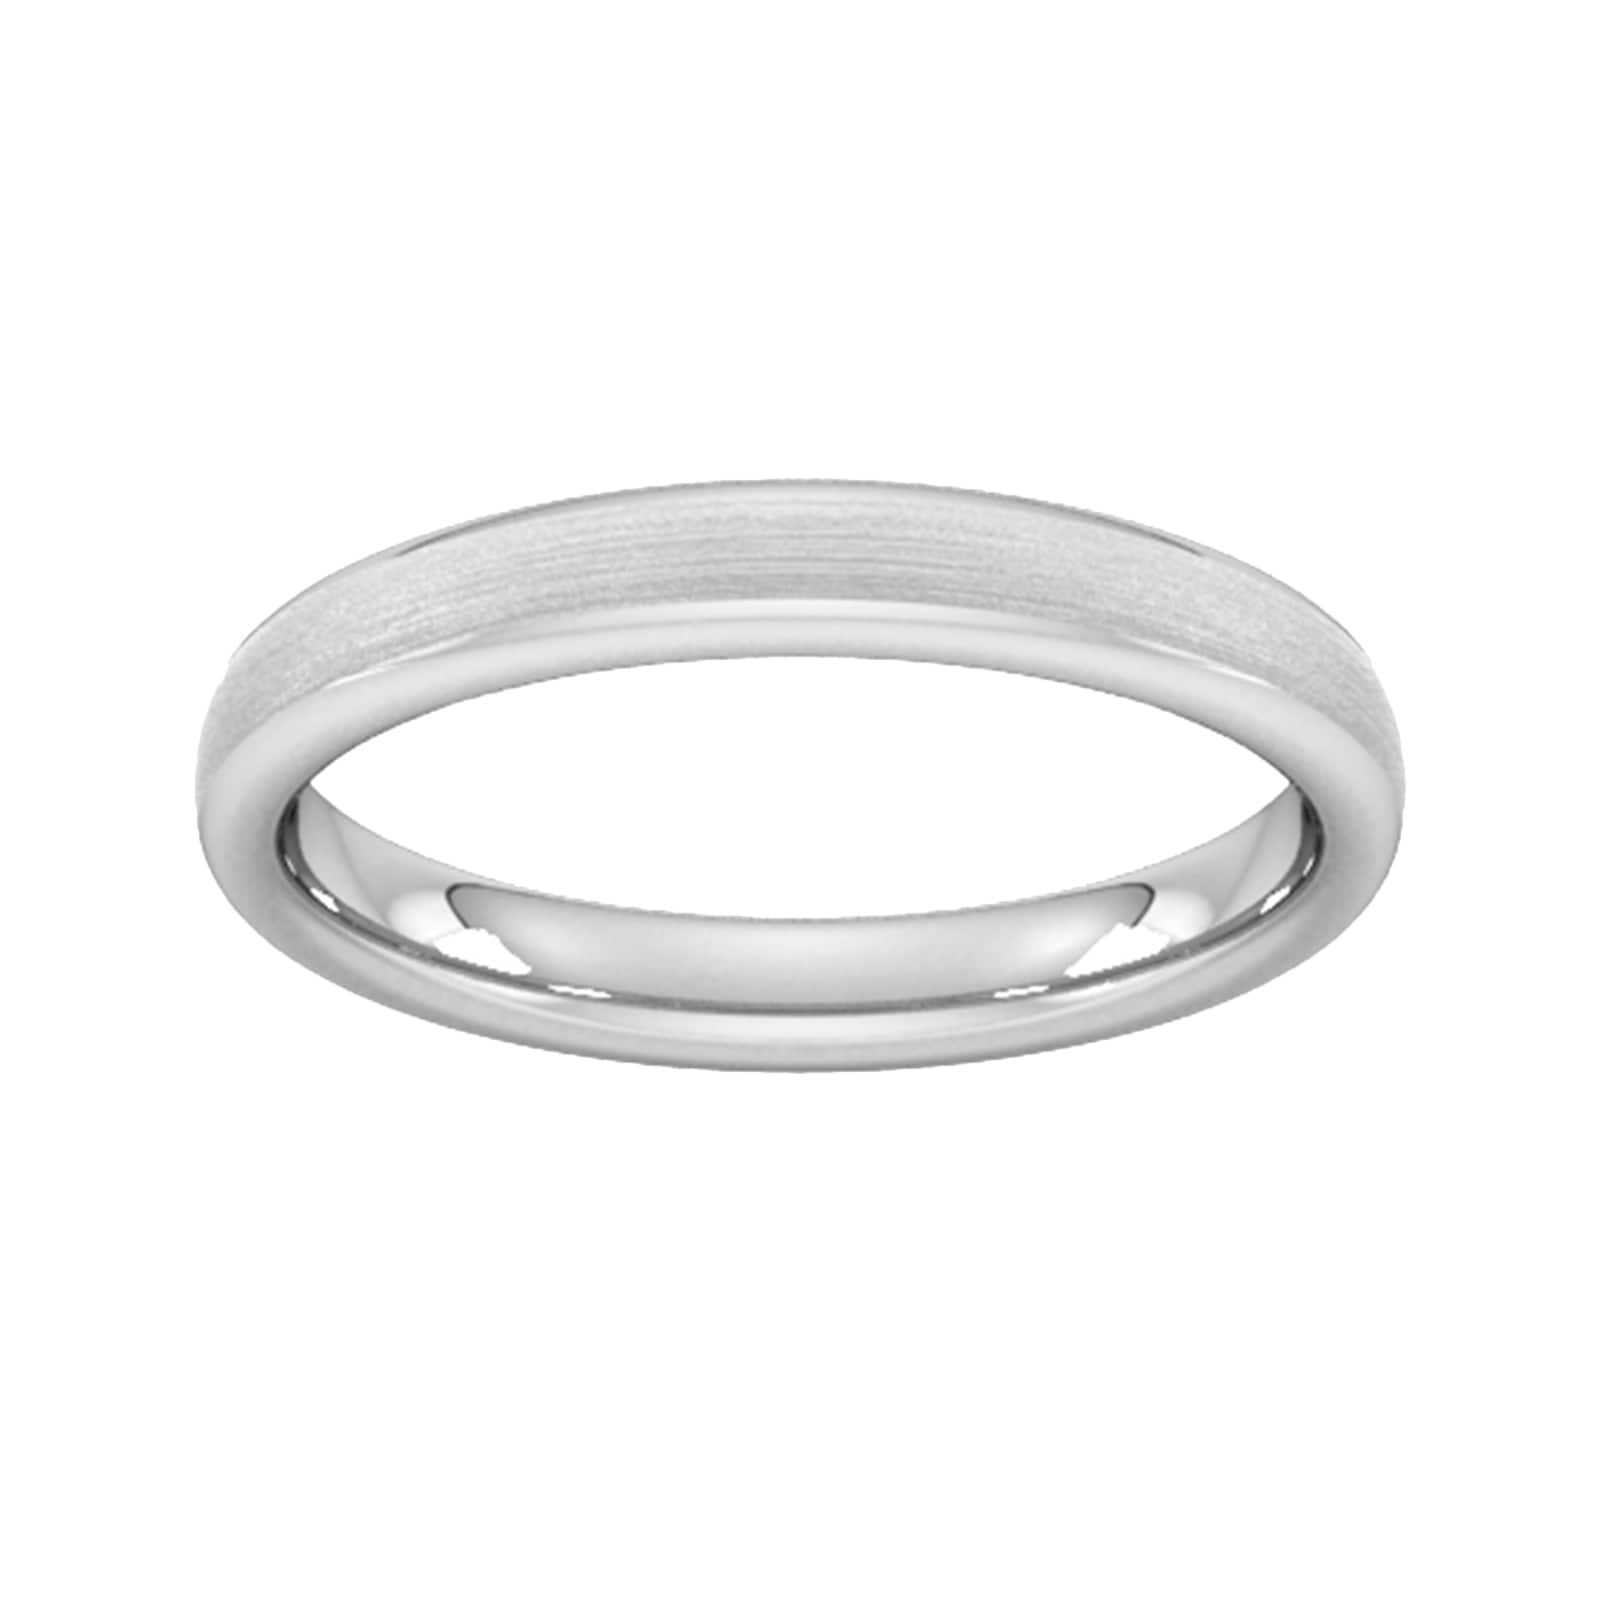 3mm Traditional Court Heavy Matt Finished Wedding Ring In 18 Carat White Gold - Ring Size U